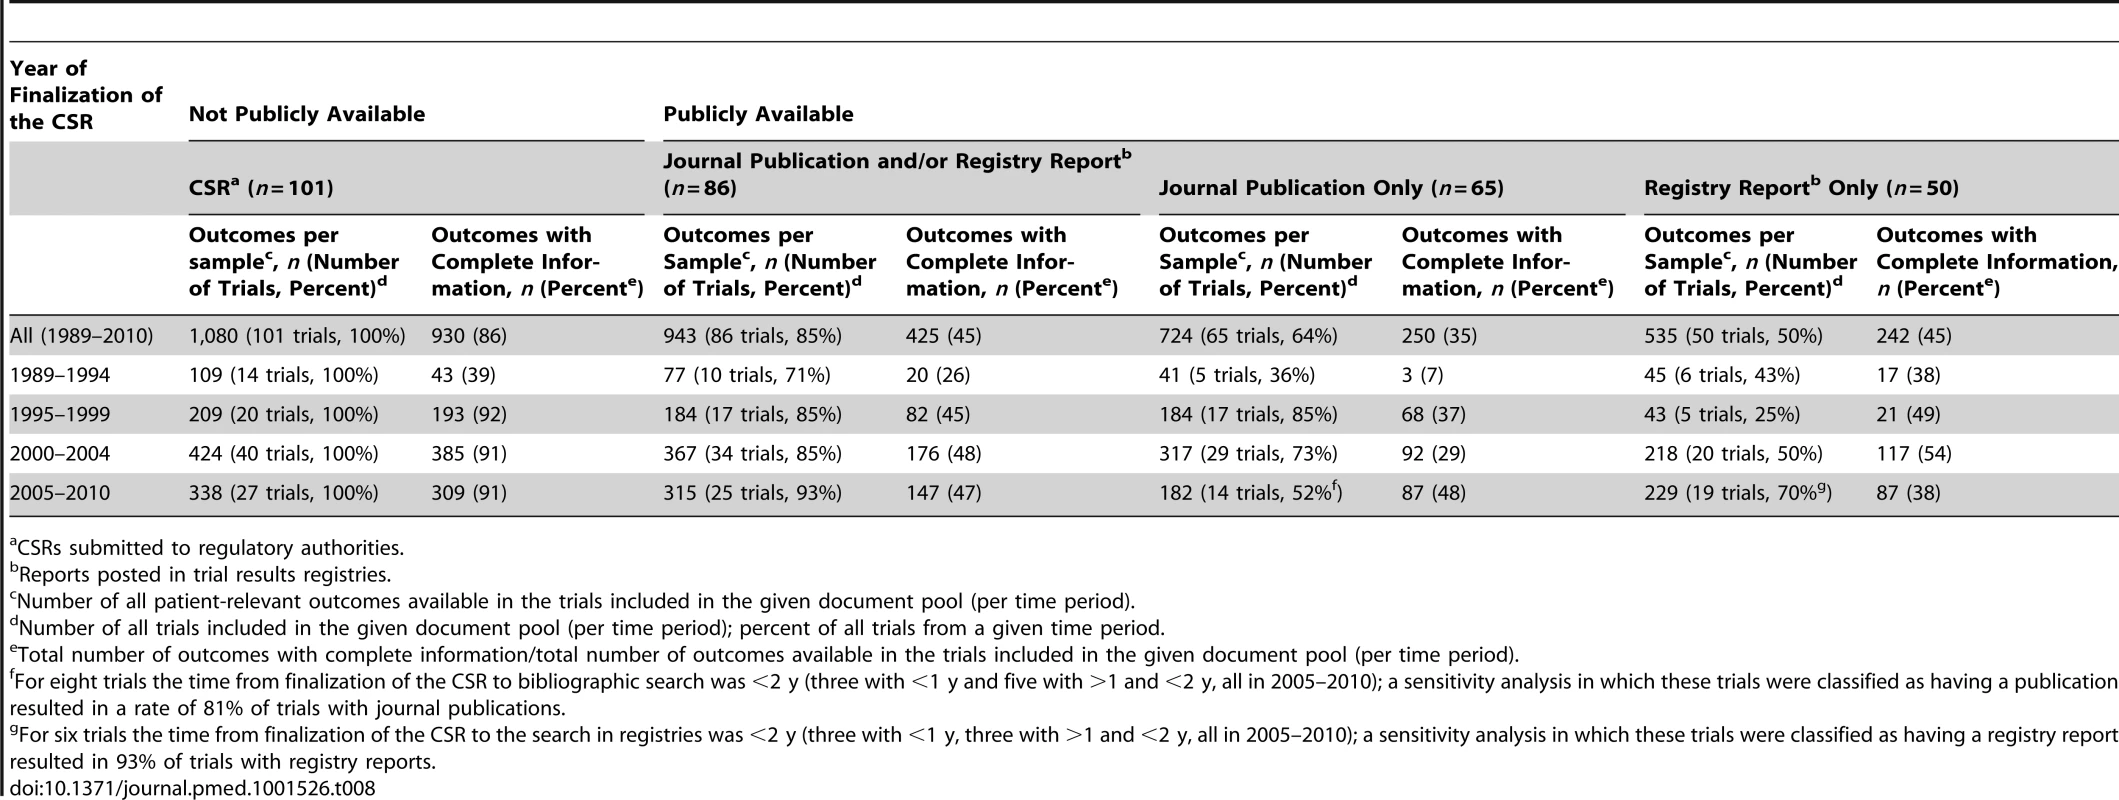 Availability of trials and completeness of information for patient-relevant outcomes in publicly available sources by year of CSR.